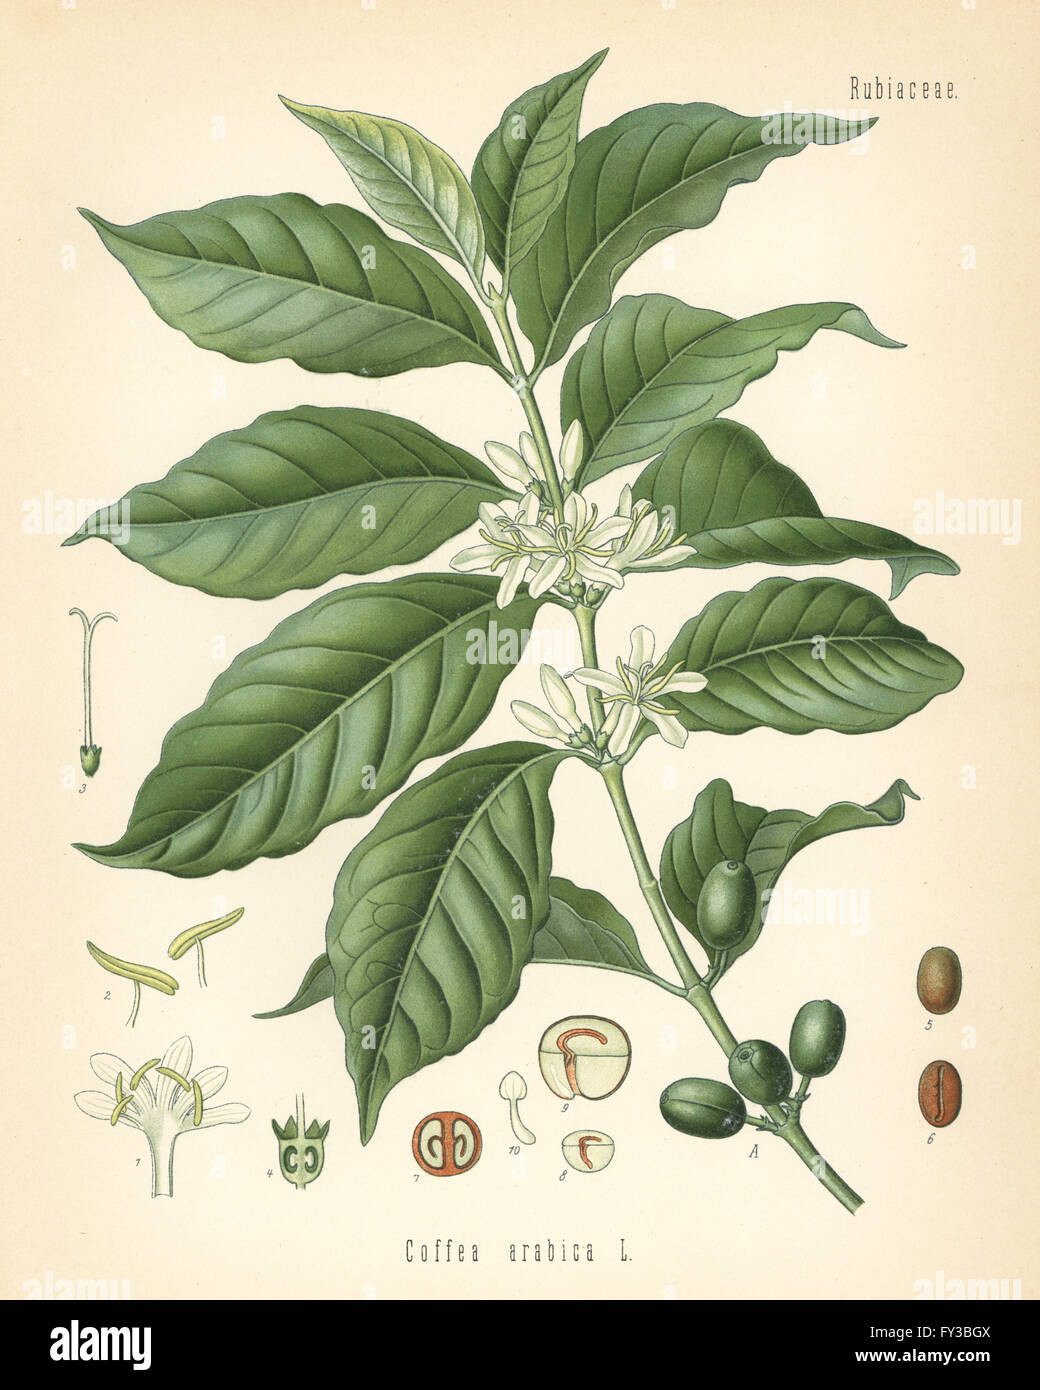 Coffee, Coffea arabica. Chromolithograph after a botanical illustration from Hermann Adolph Koehler's Medicinal Plants, edited by Gustav Pabst, Koehler, Germany, 1887. Stock Photo